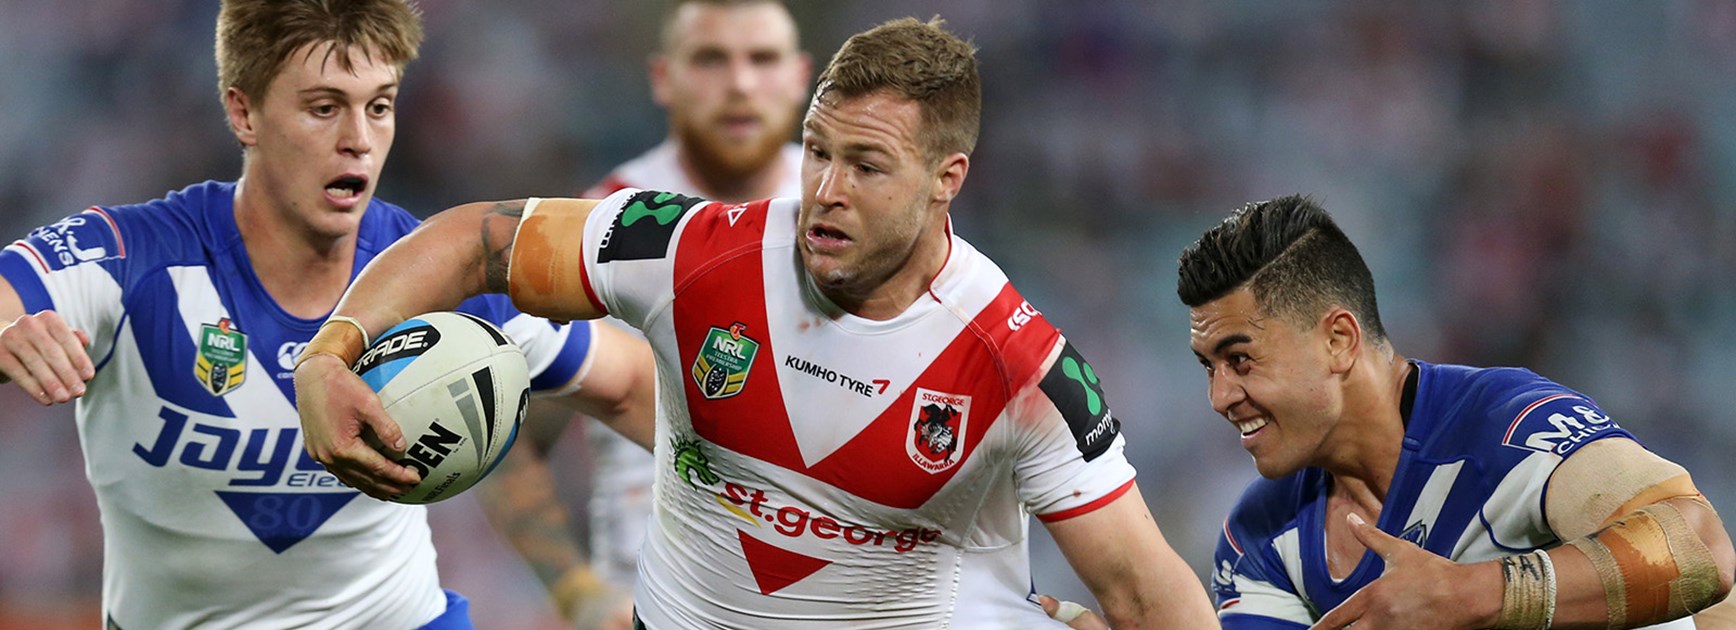 Departing Dragons forward Trent Merrin had a strong performance in his last game for the Red V.